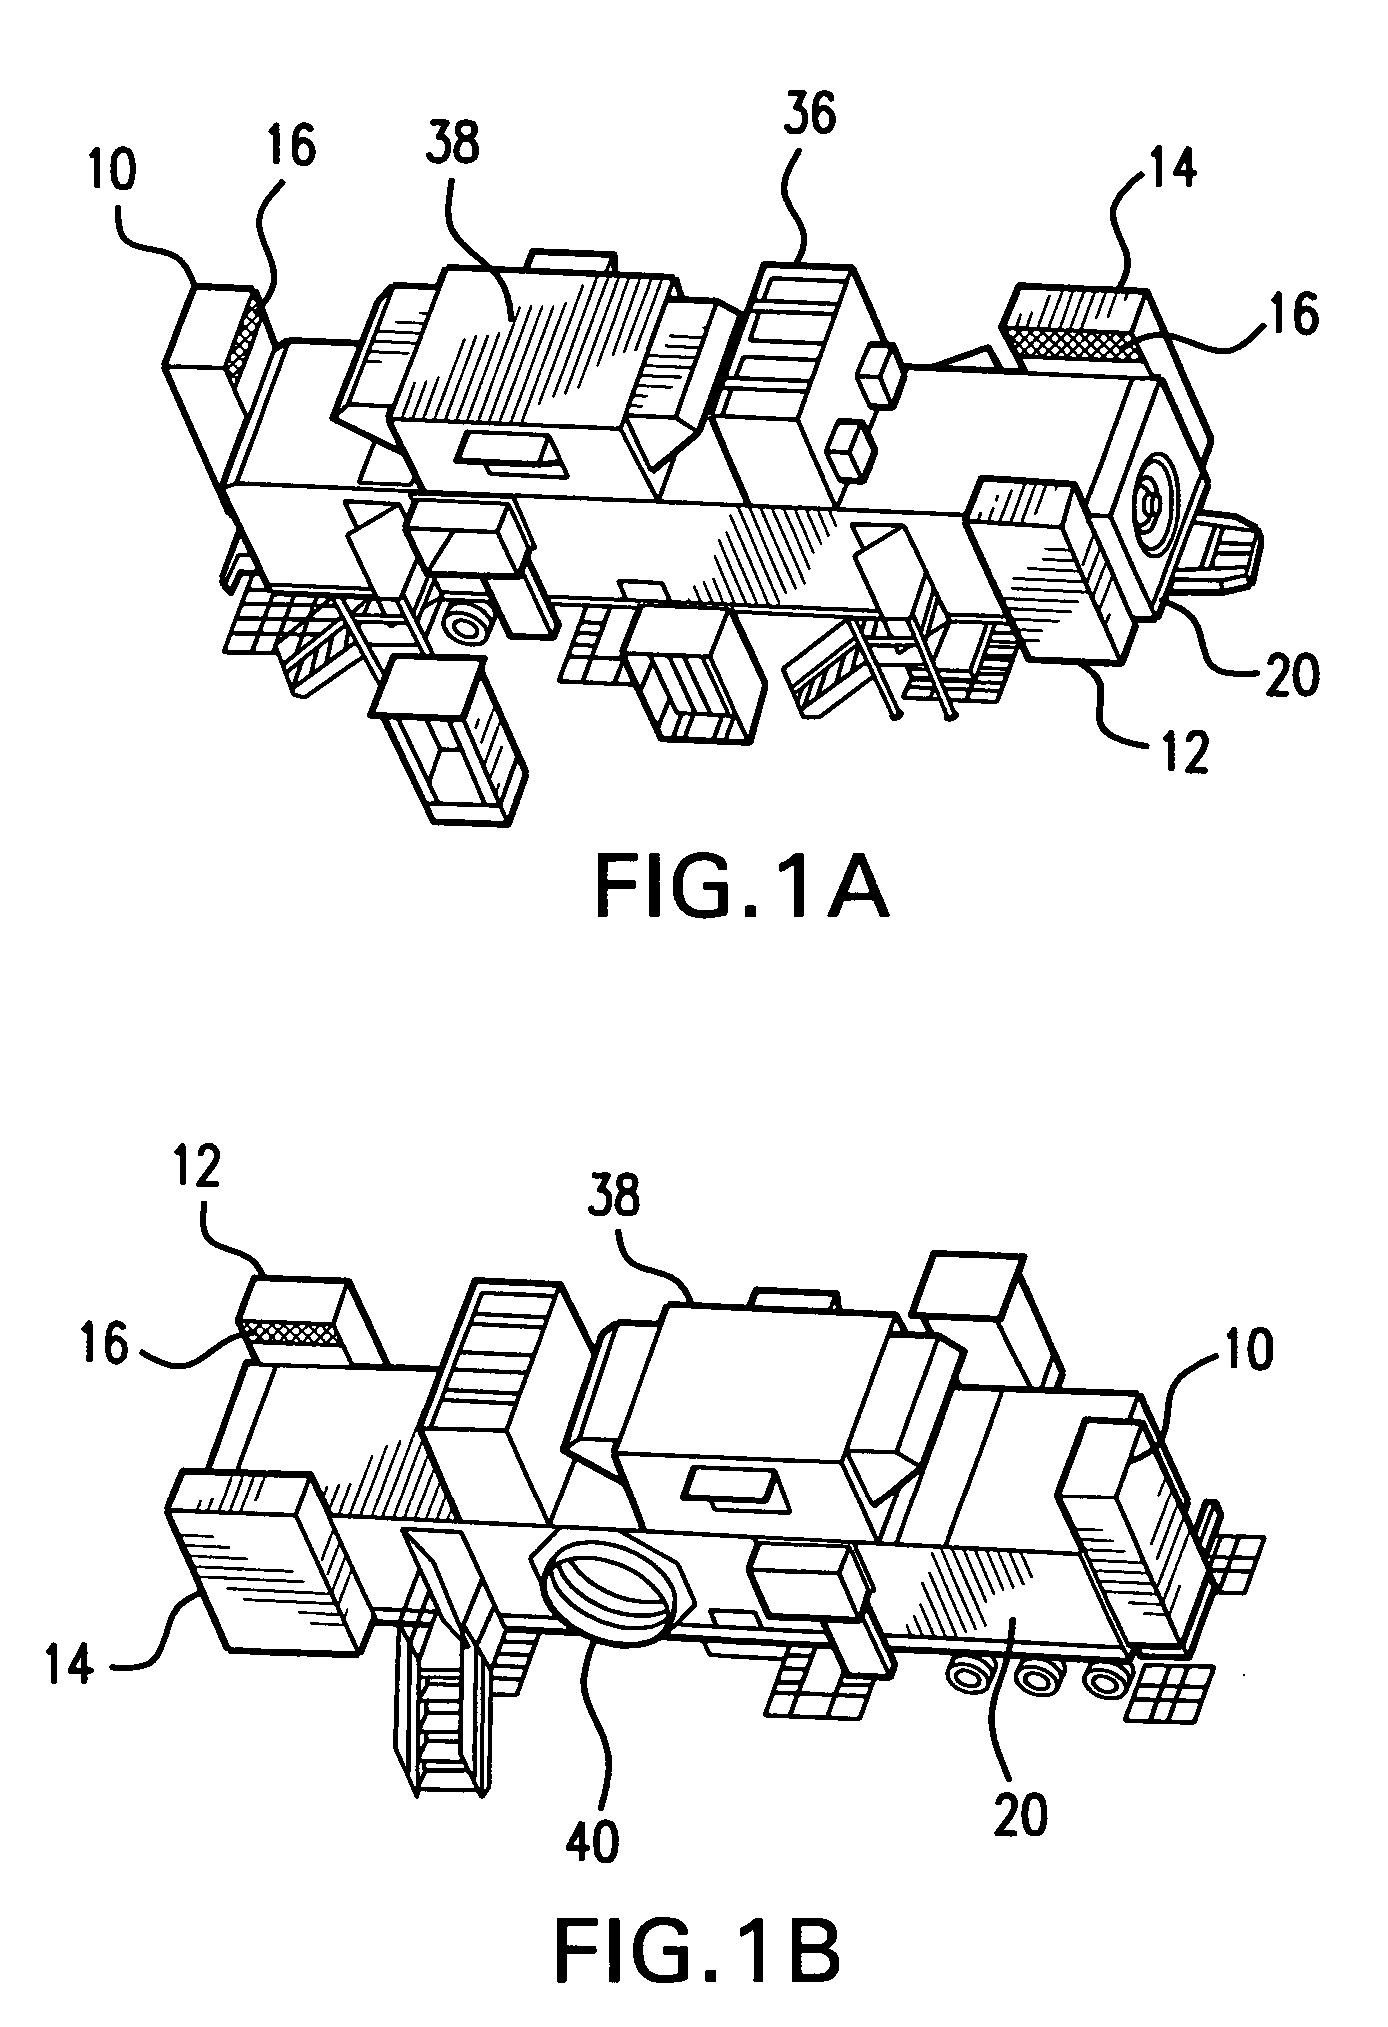 Power trailer structural elements for air flow, sound attenuation and fire suppression